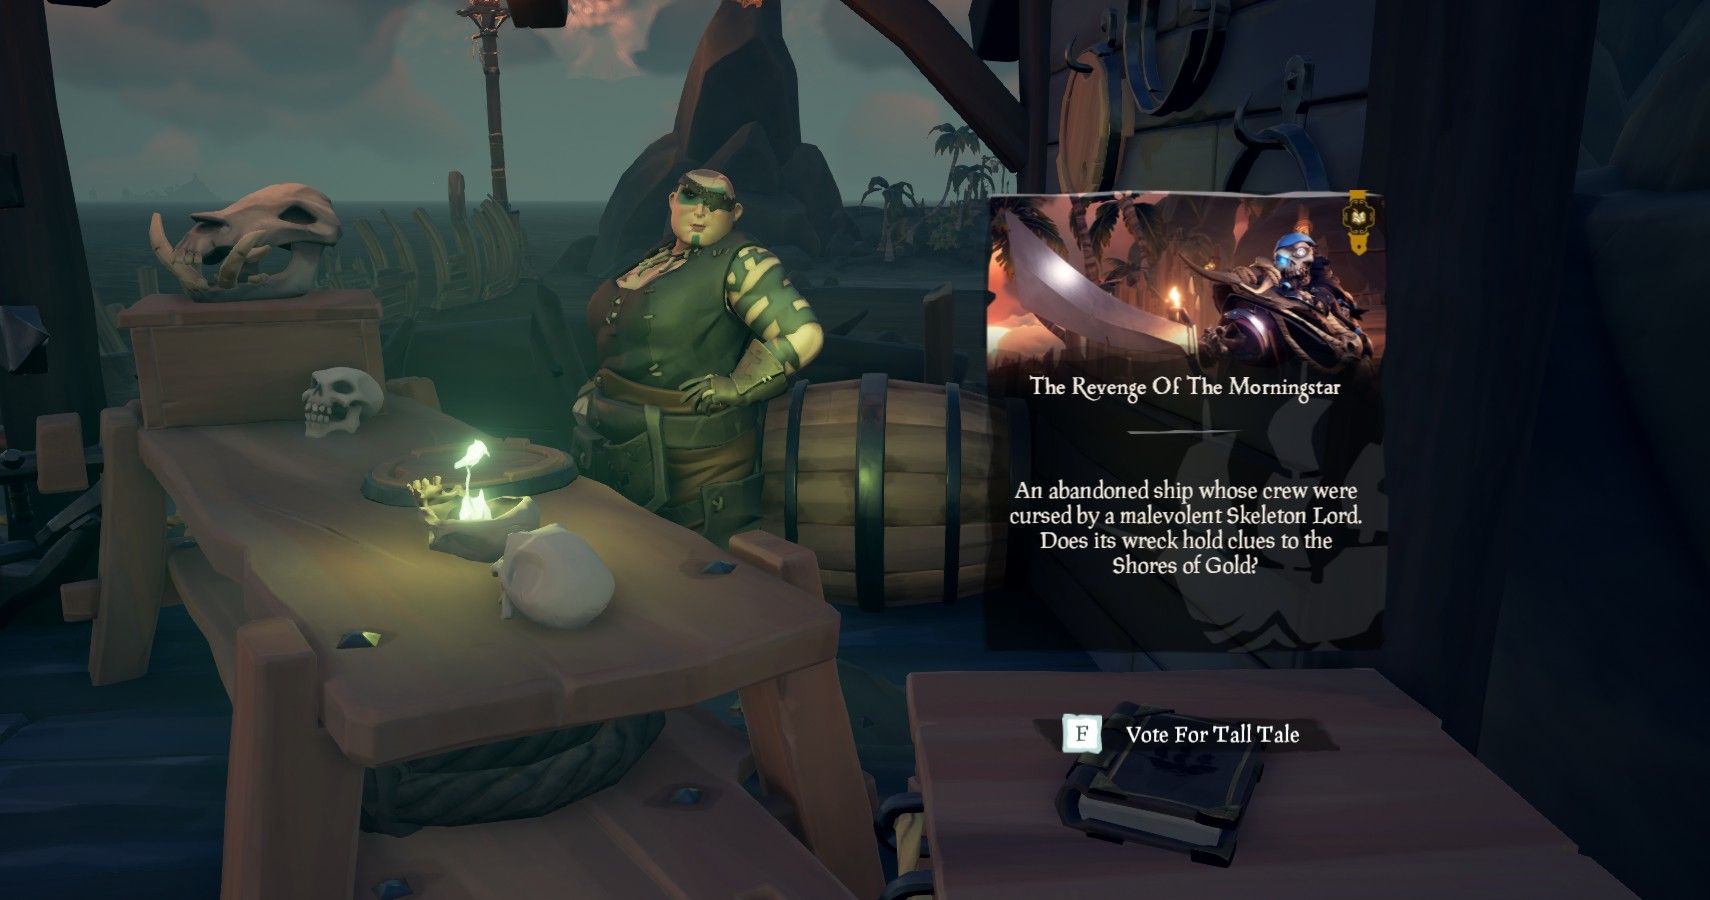 The Revenge of The Morningstar in Sea of Thieves